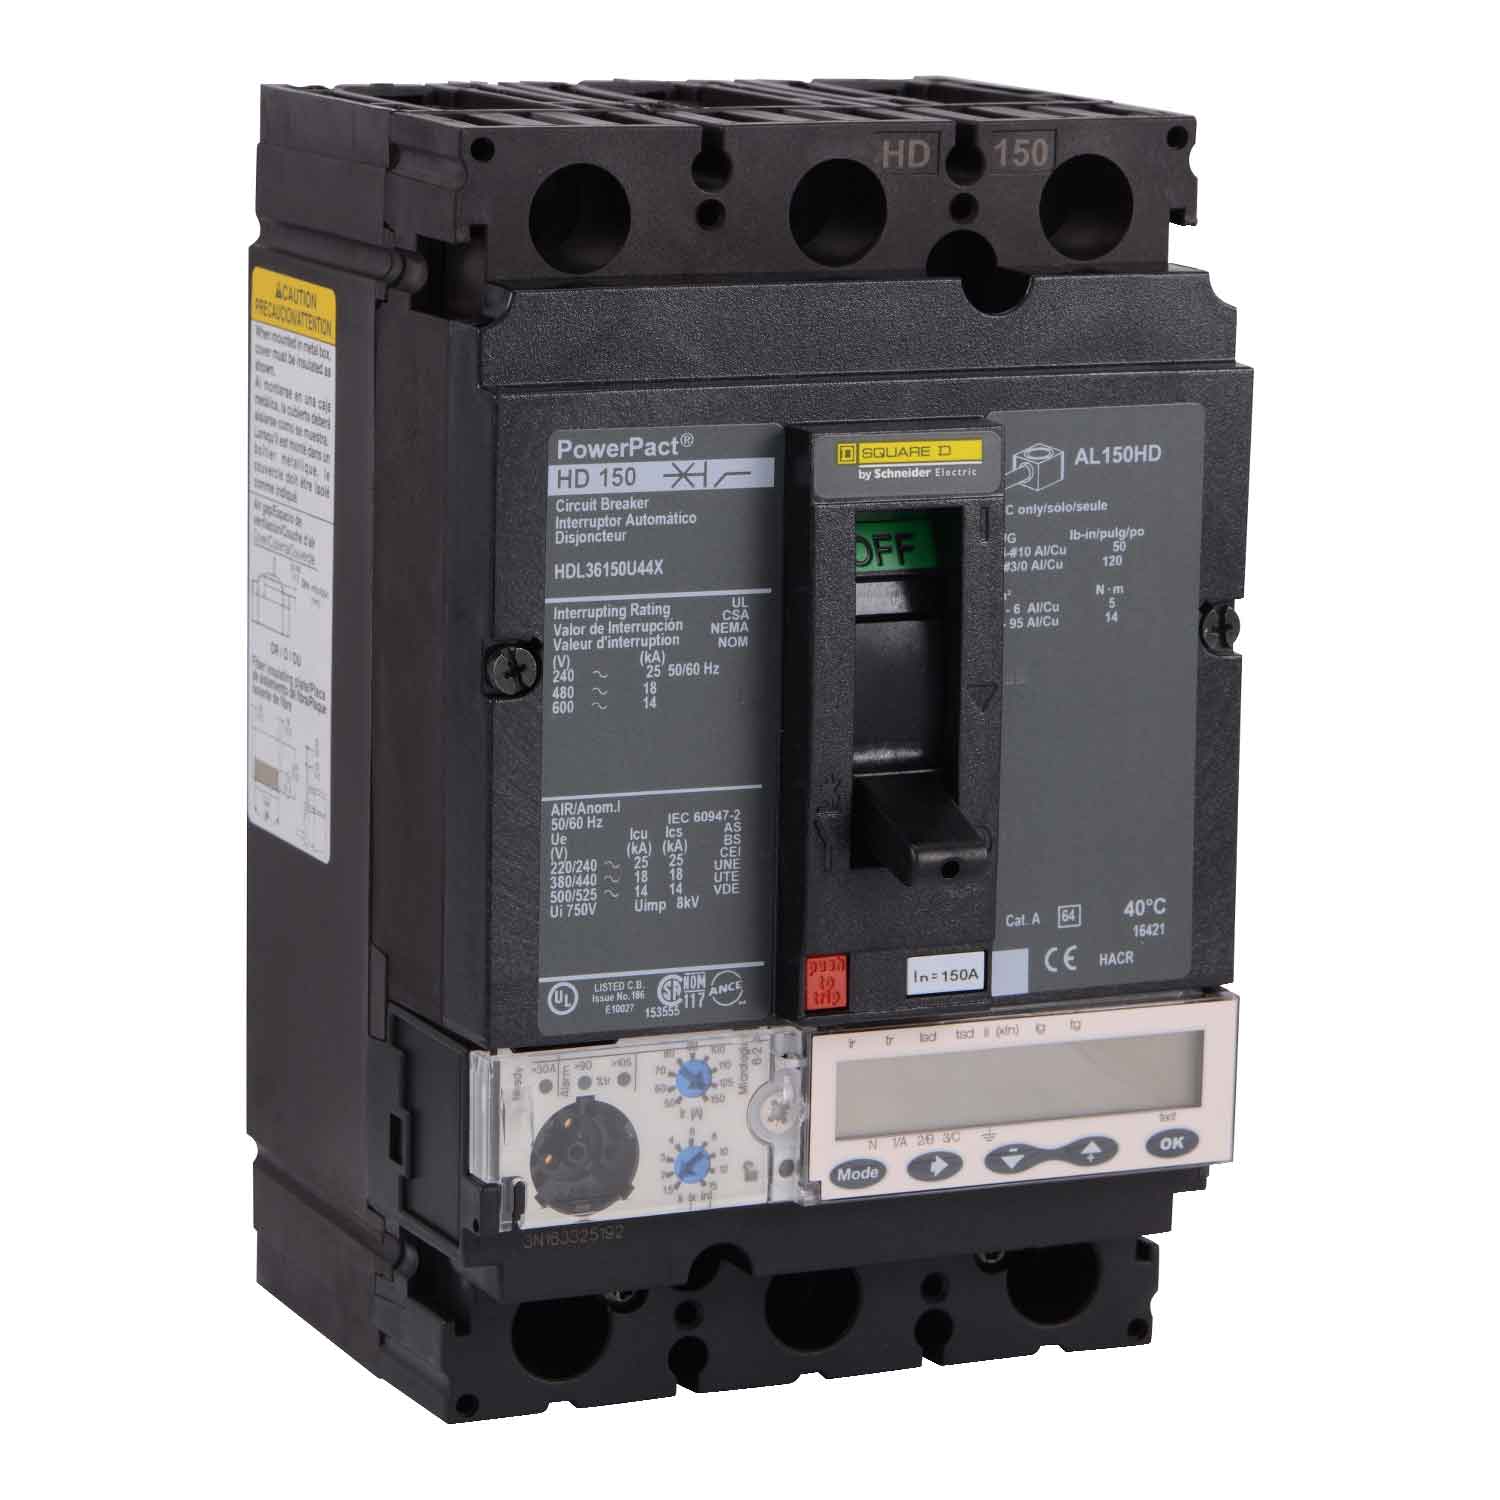 HDL36150U44X - Square D - Molded Case Circuit Breakers